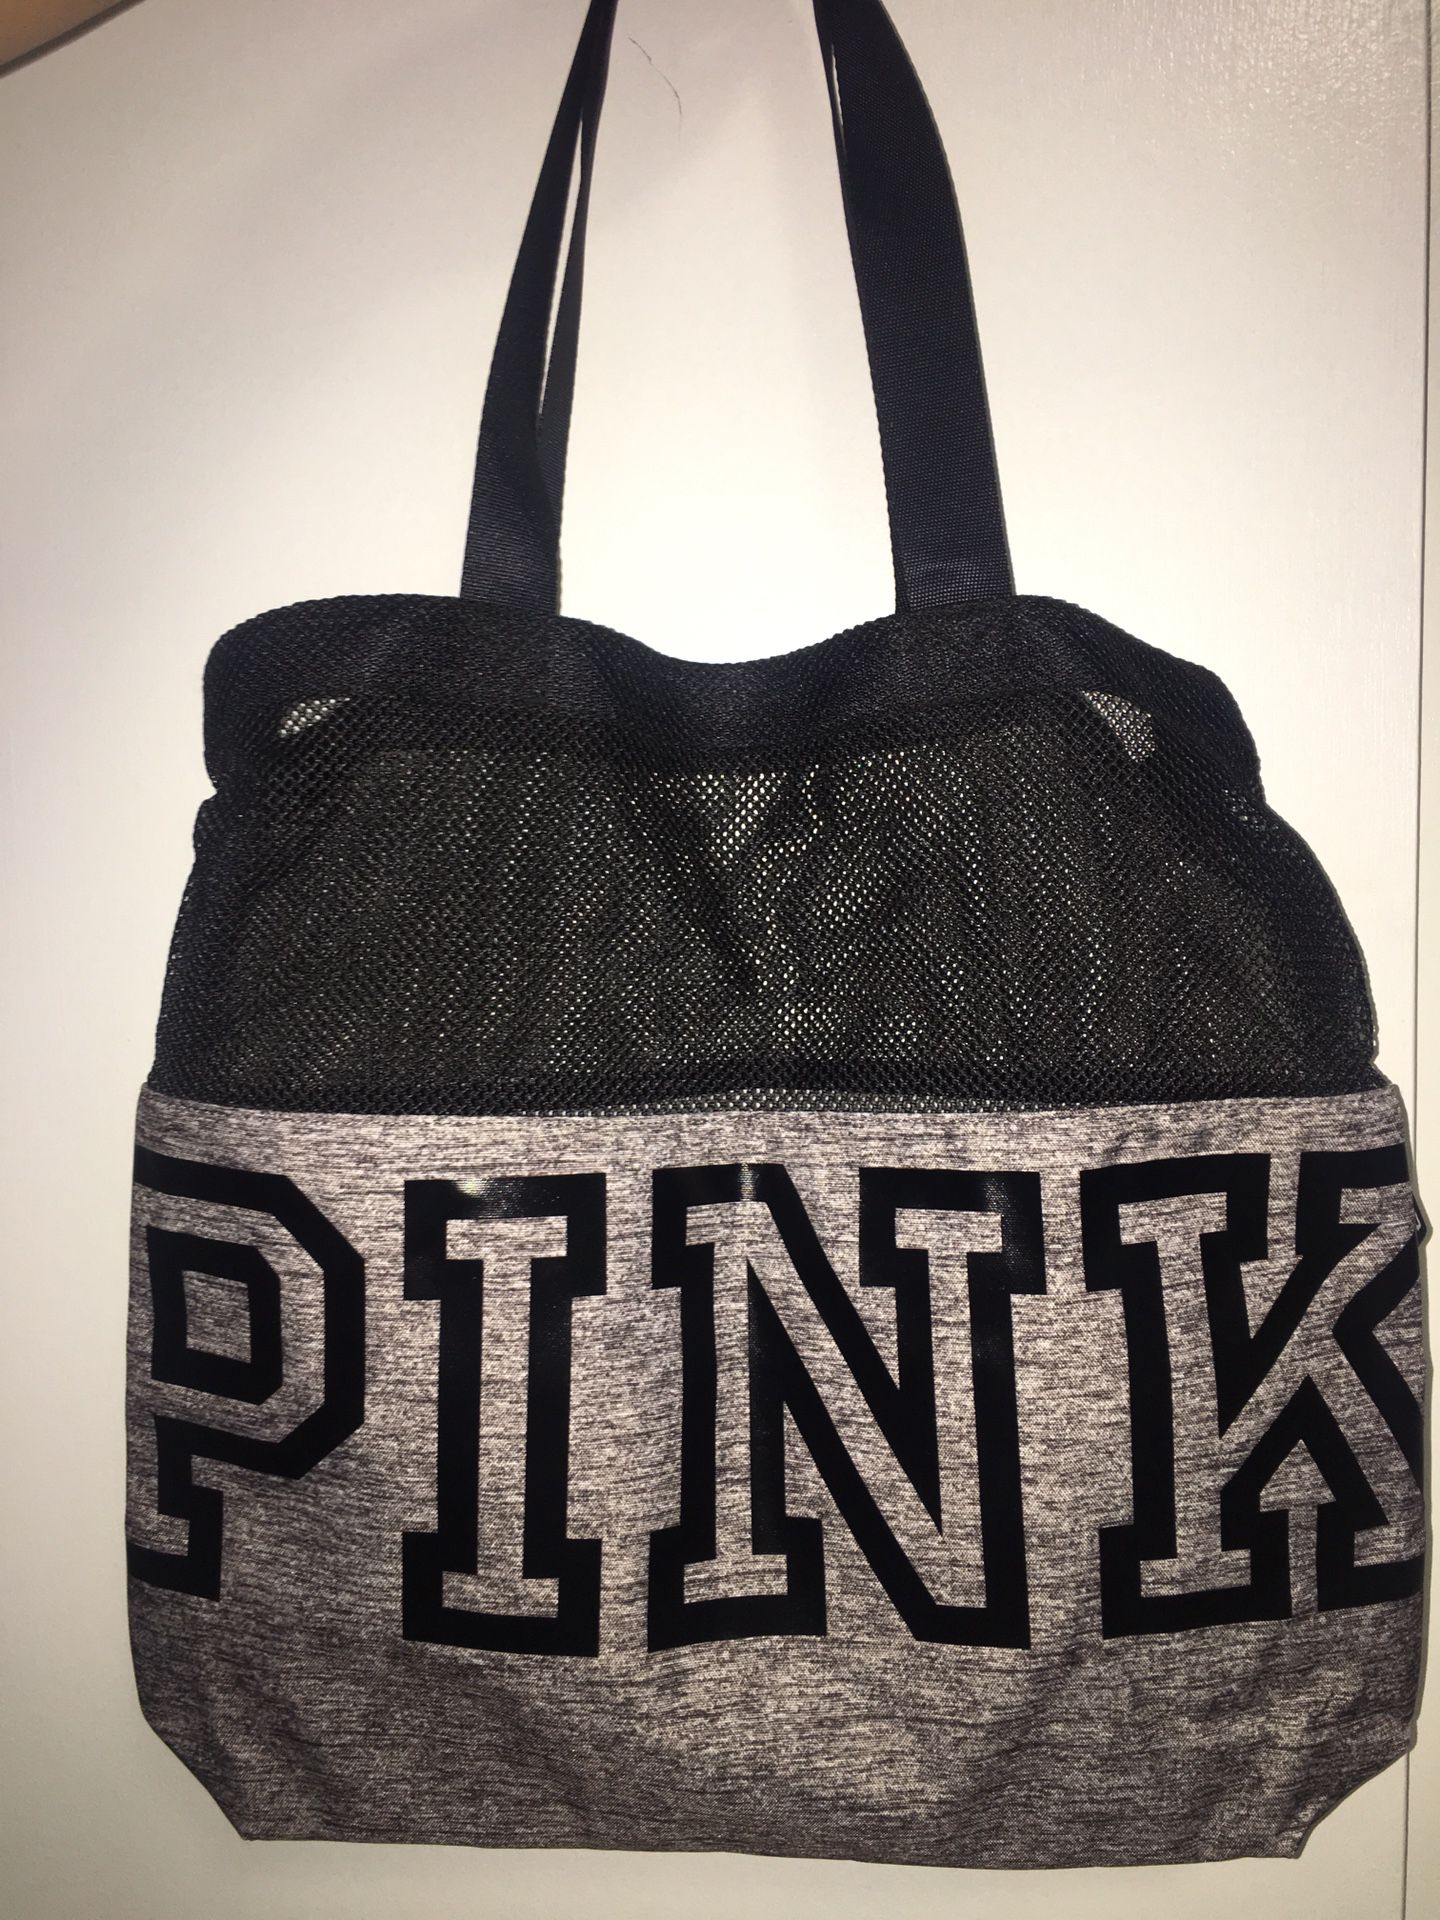 New VS PINK tote